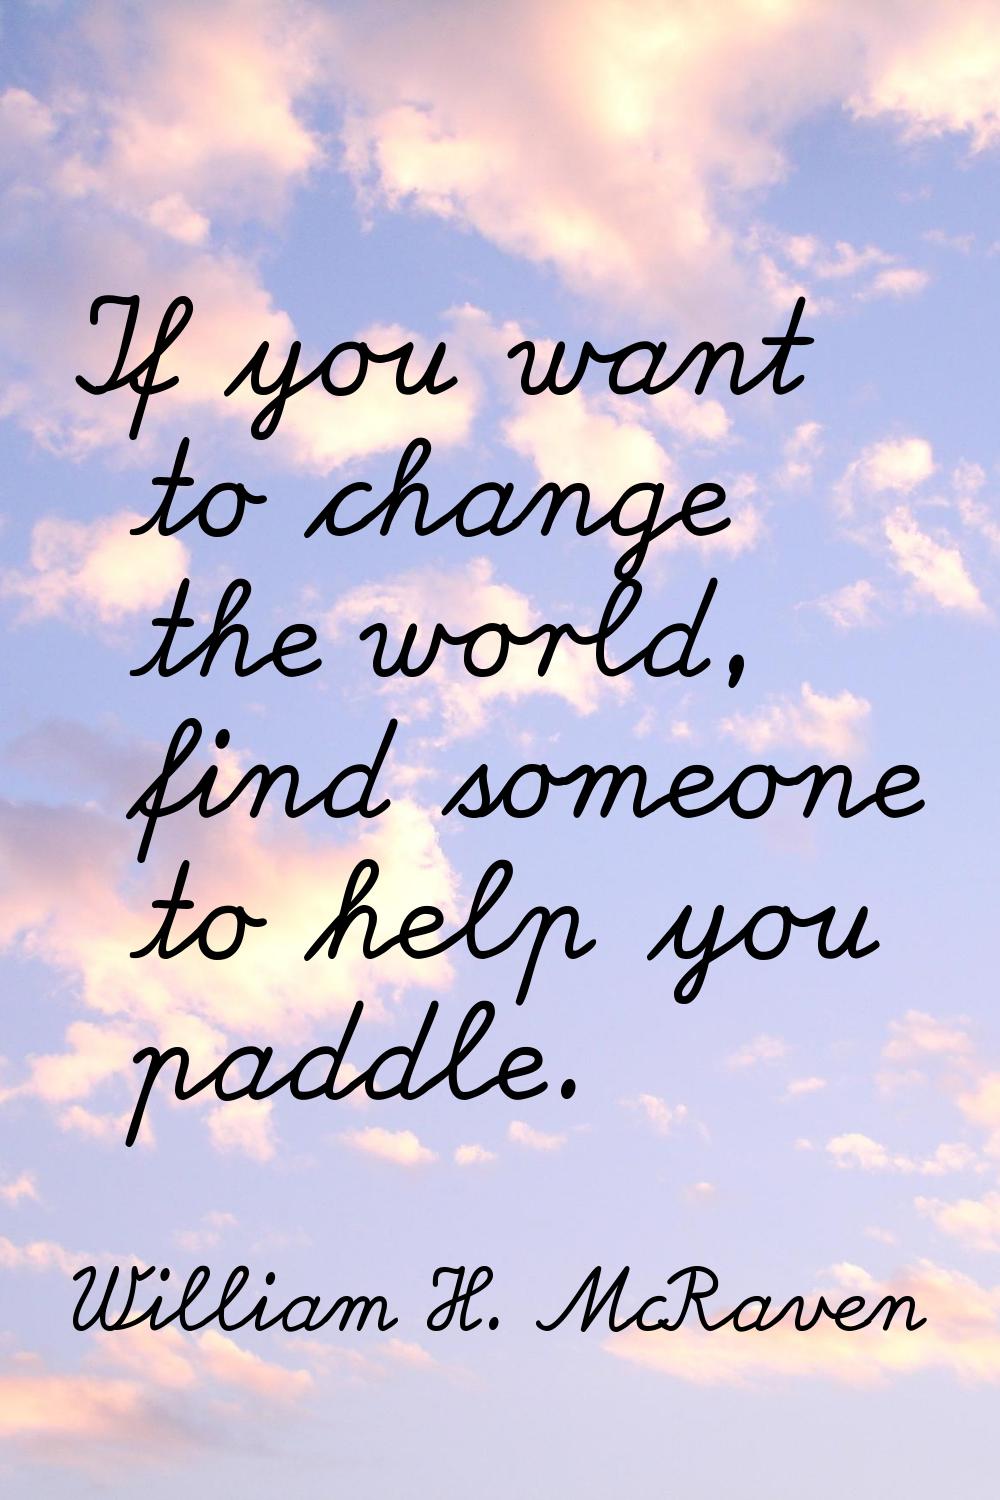 If you want to change the world, find someone to help you paddle.